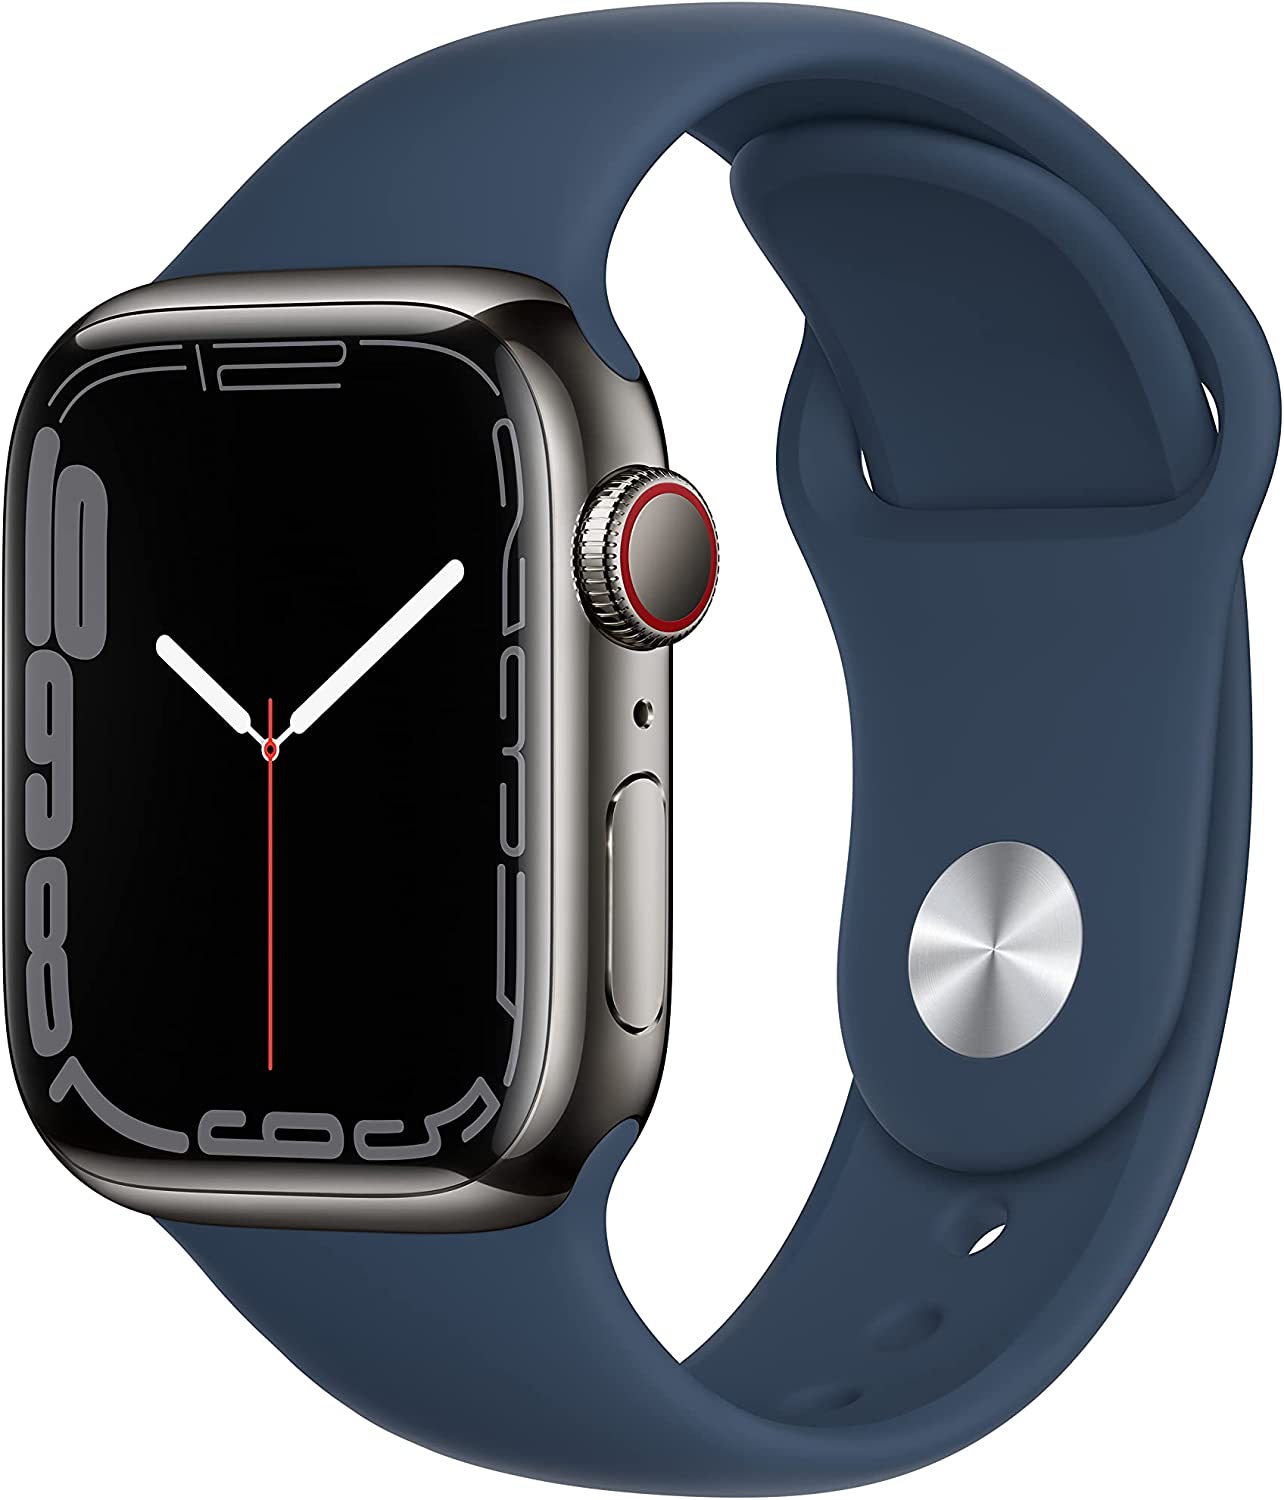 Apple Watch Series 7 (2021) 41mm GPS + Cellular - Graphite Stainless Steel Case &amp; Blue Sport Band (Refurbished)